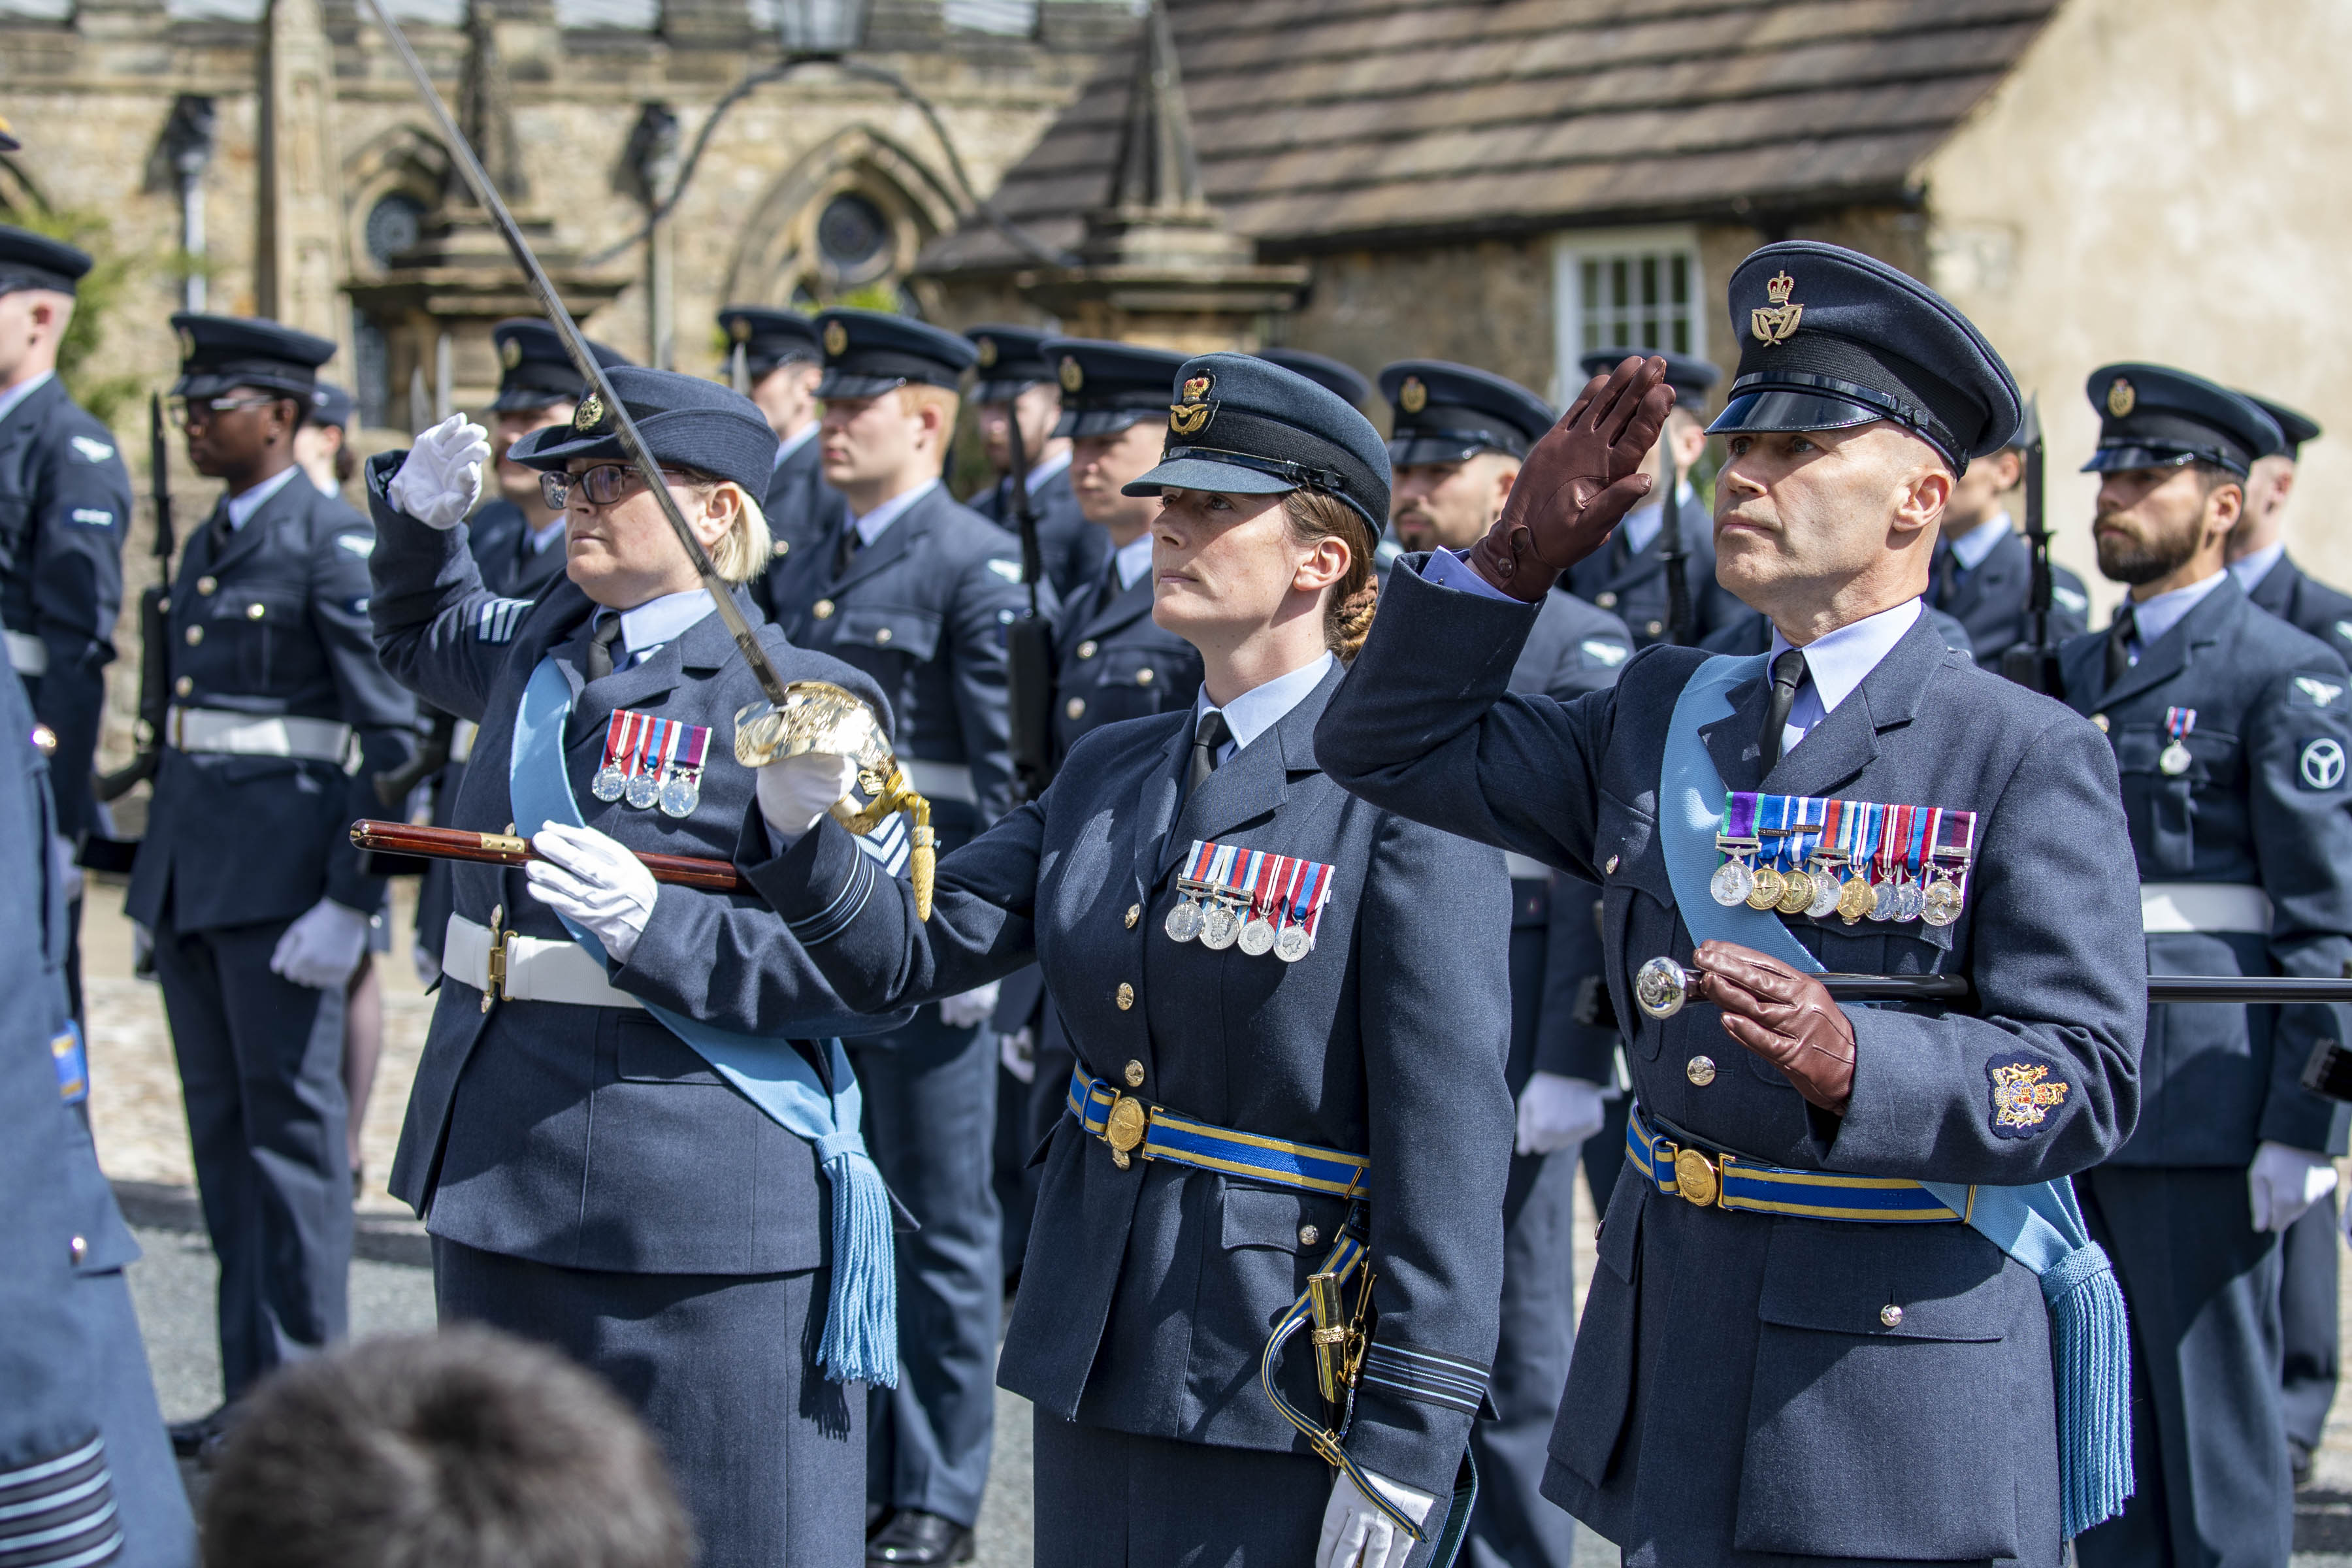 Image shows RAF aviators in parade with sword.